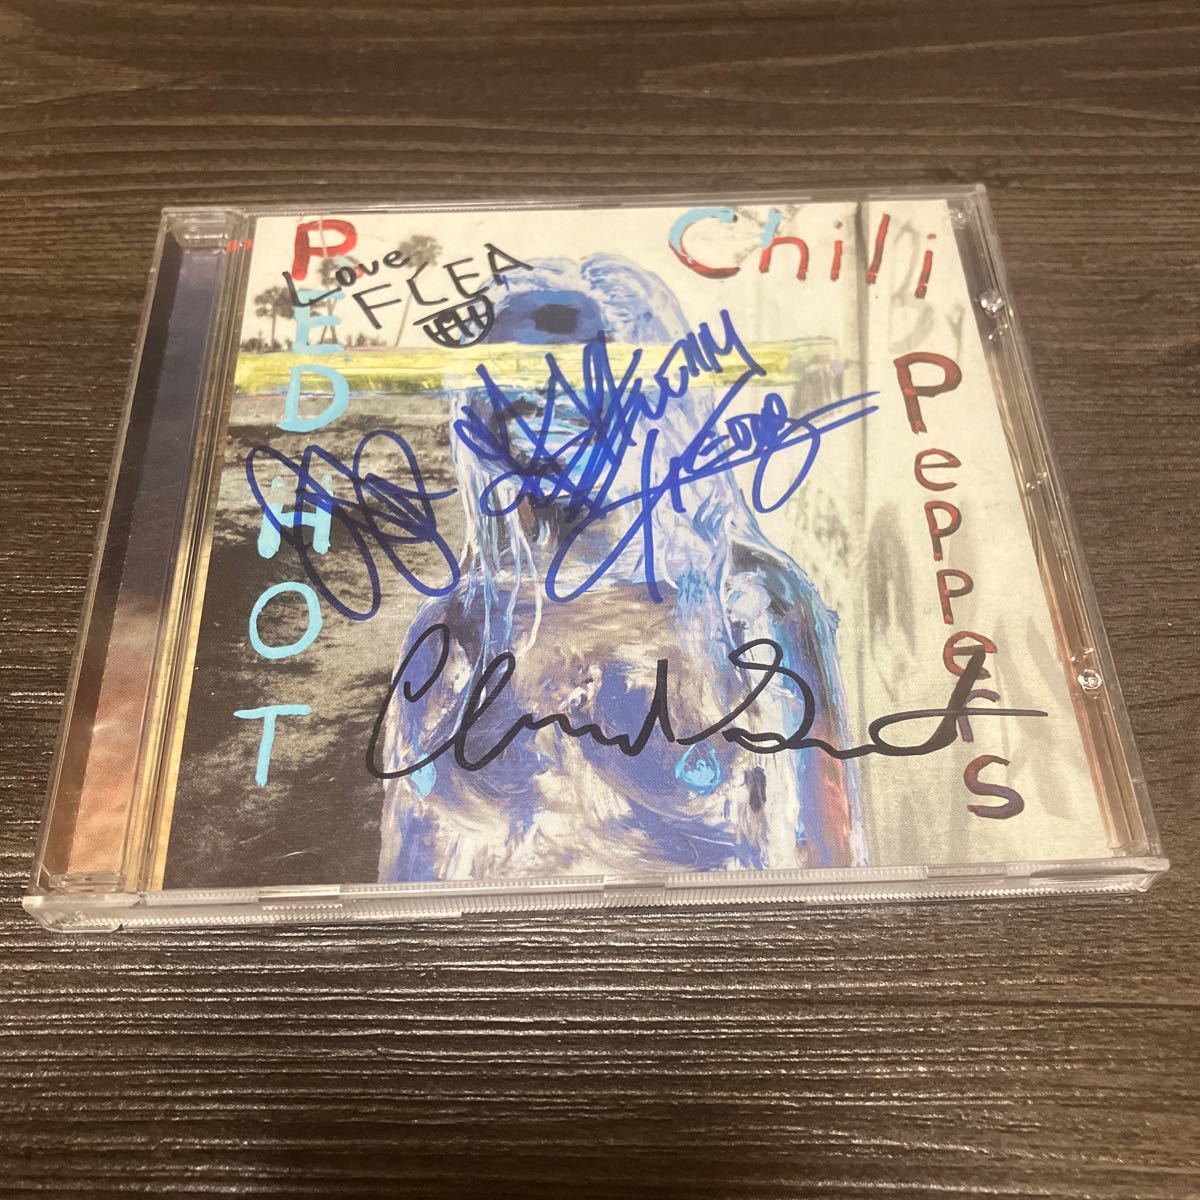 Red Hot Chili Peppers 直筆サイン入り CD-